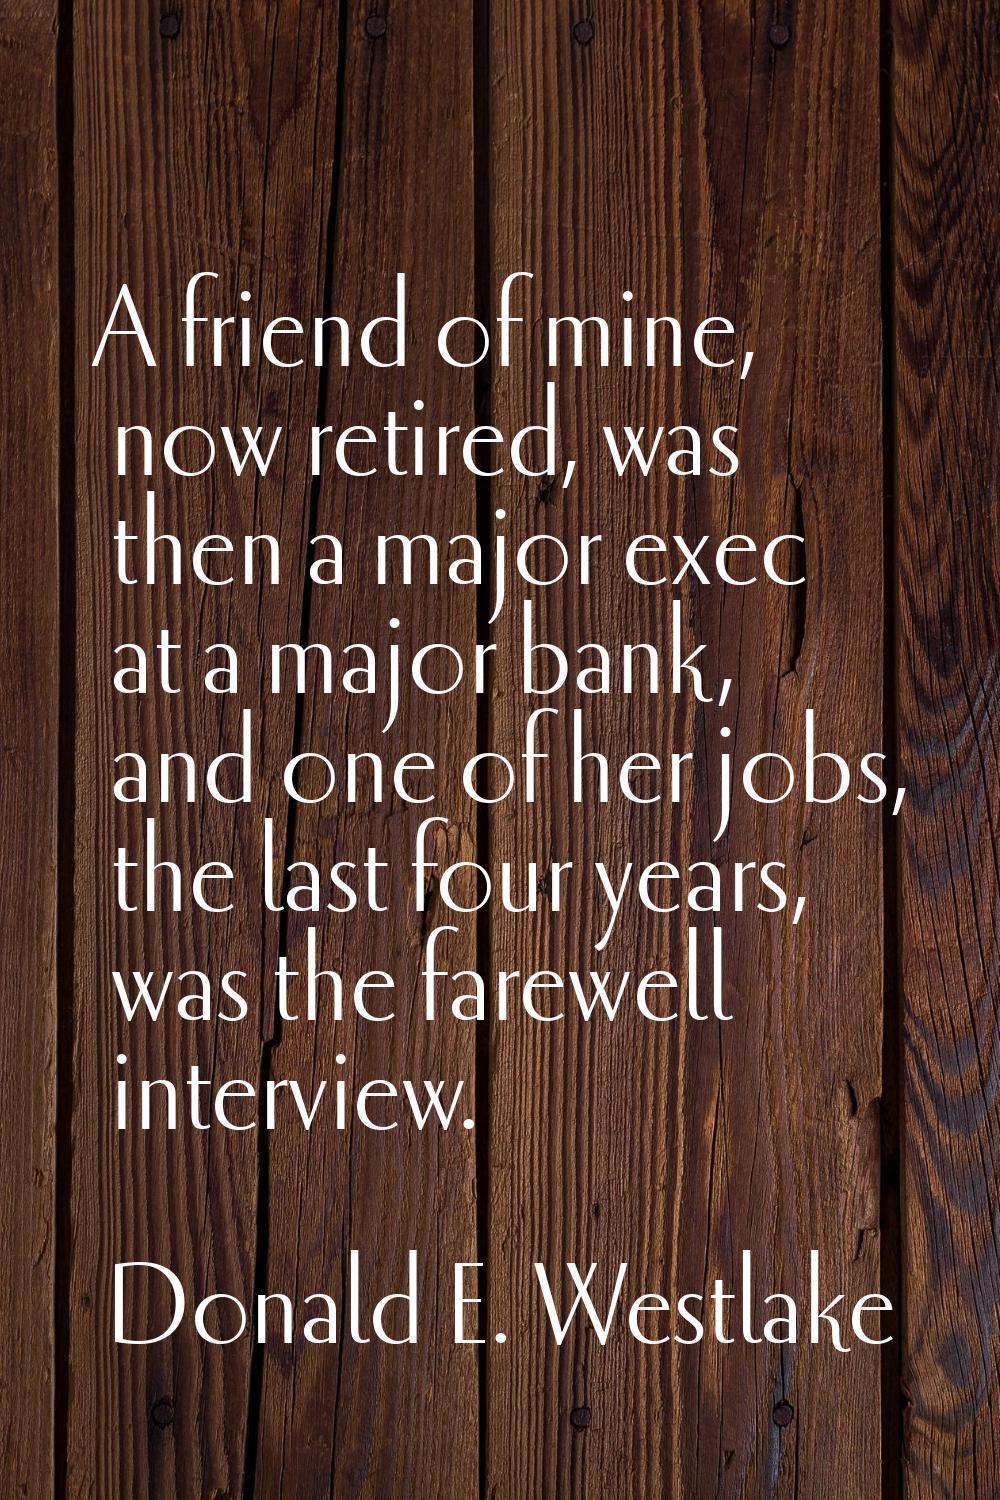 A friend of mine, now retired, was then a major exec at a major bank, and one of her jobs, the last